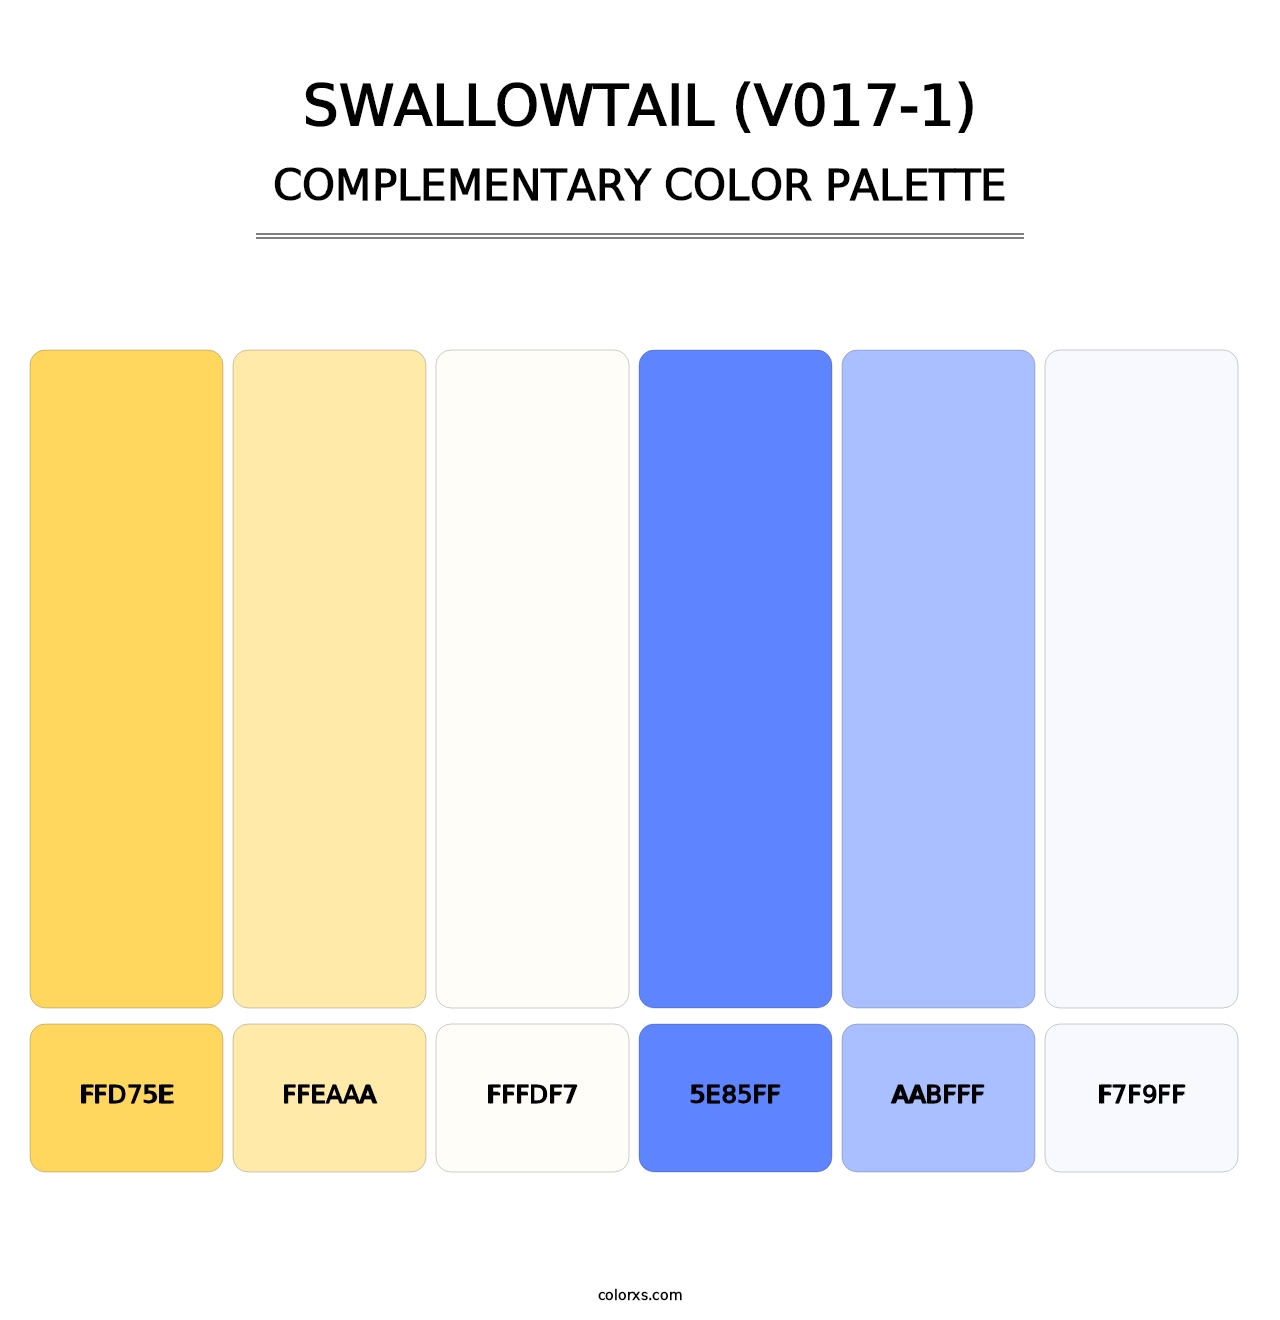 Swallowtail (V017-1) - Complementary Color Palette